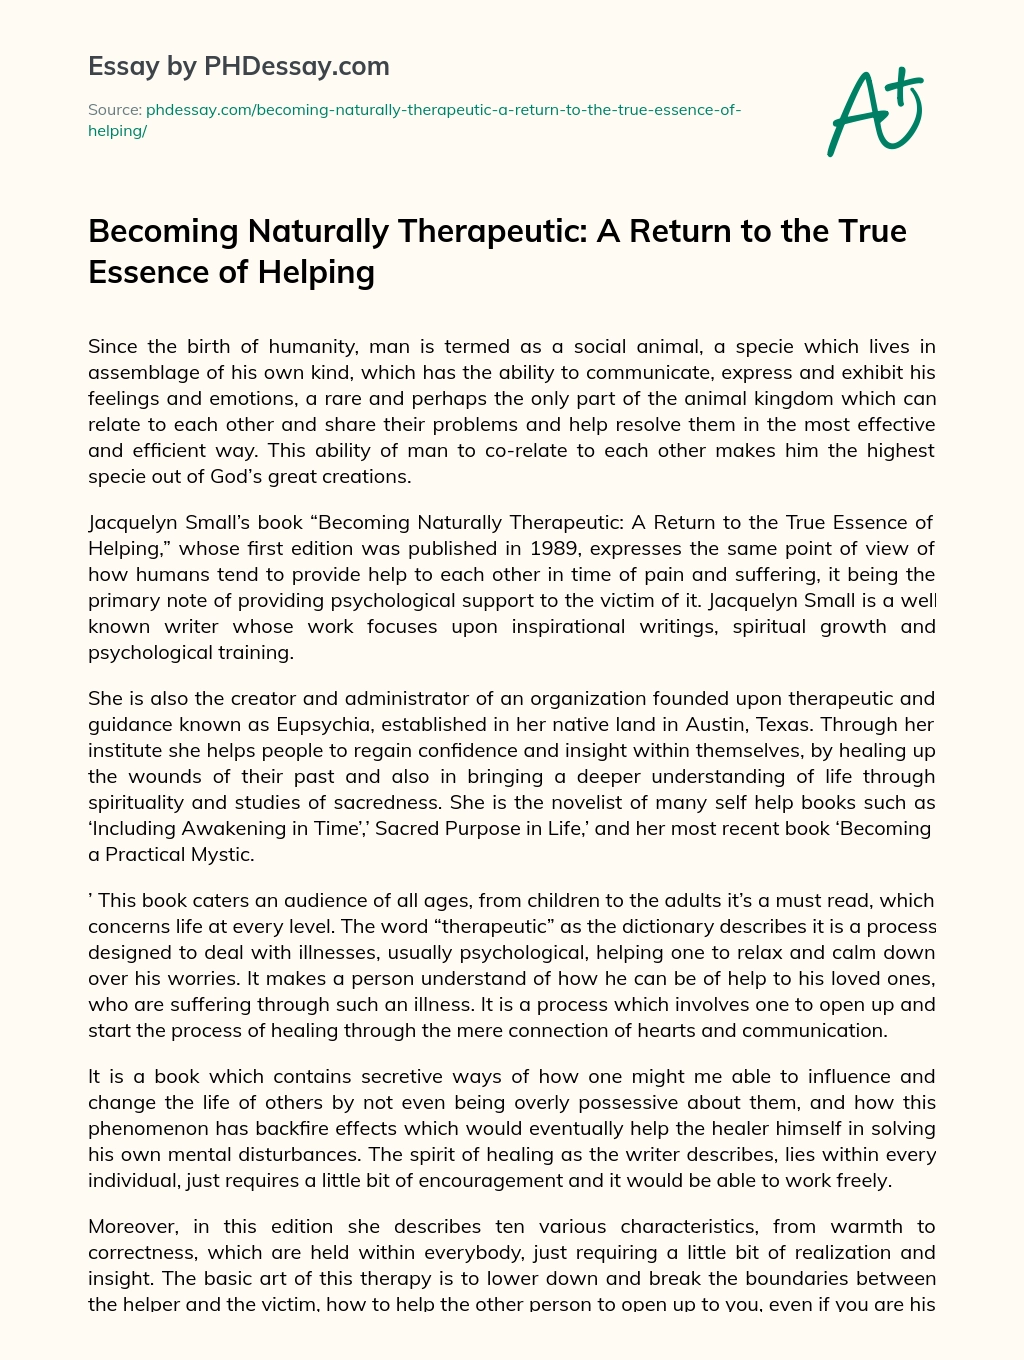 Becoming Naturally Therapeutic: A Return to the True Essence of Helping essay